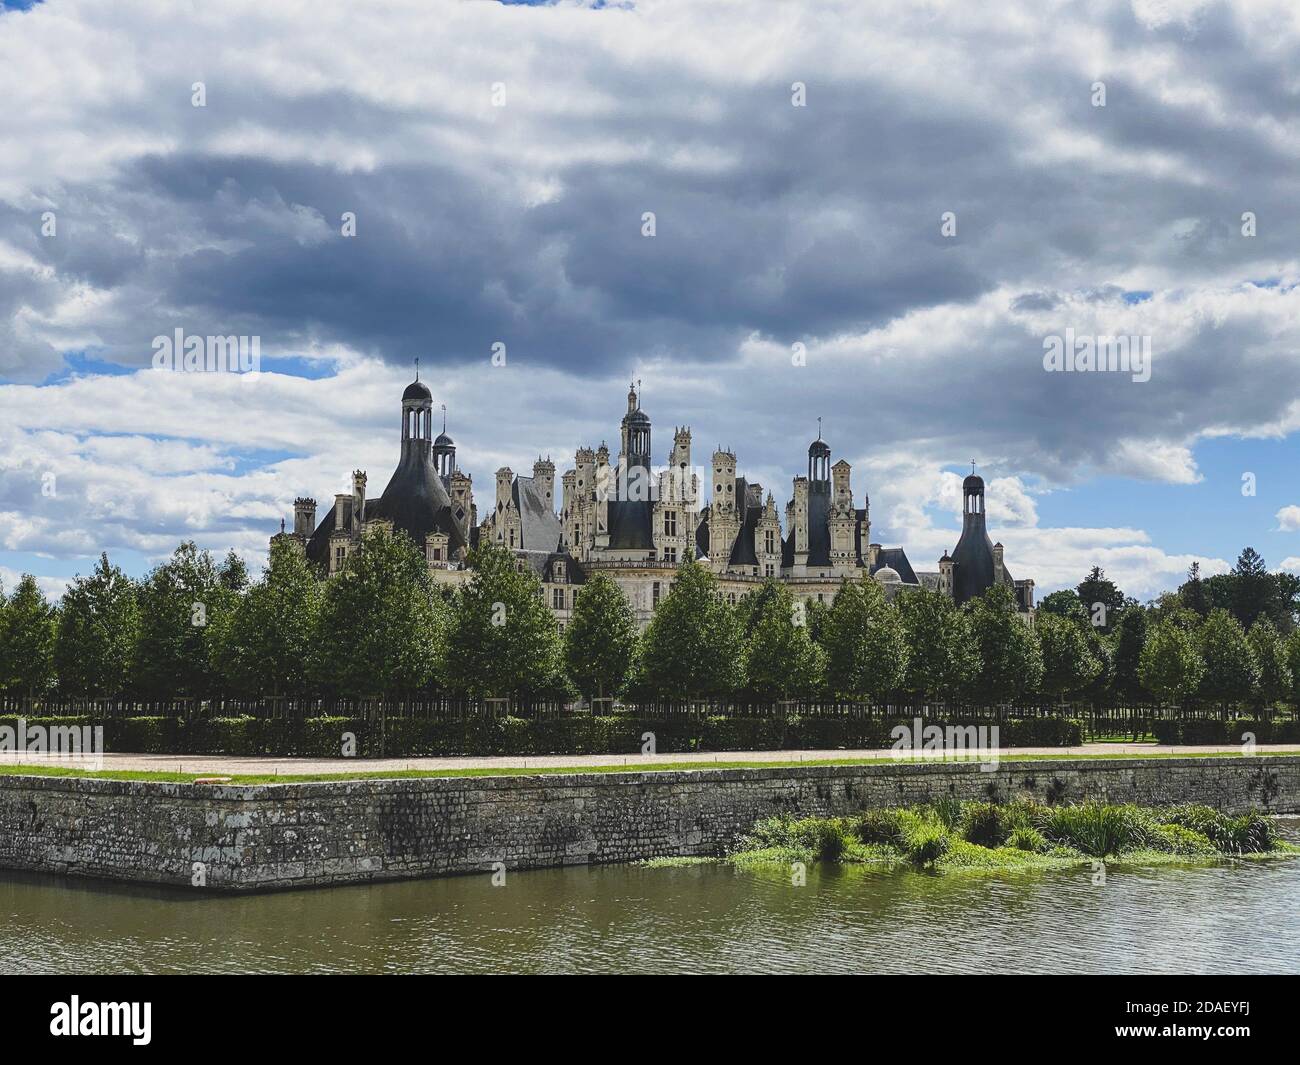 Chateau de Chambord in the Loire Valley, UNESCO world heritage in France, view over the beautiful french garden Stock Photo